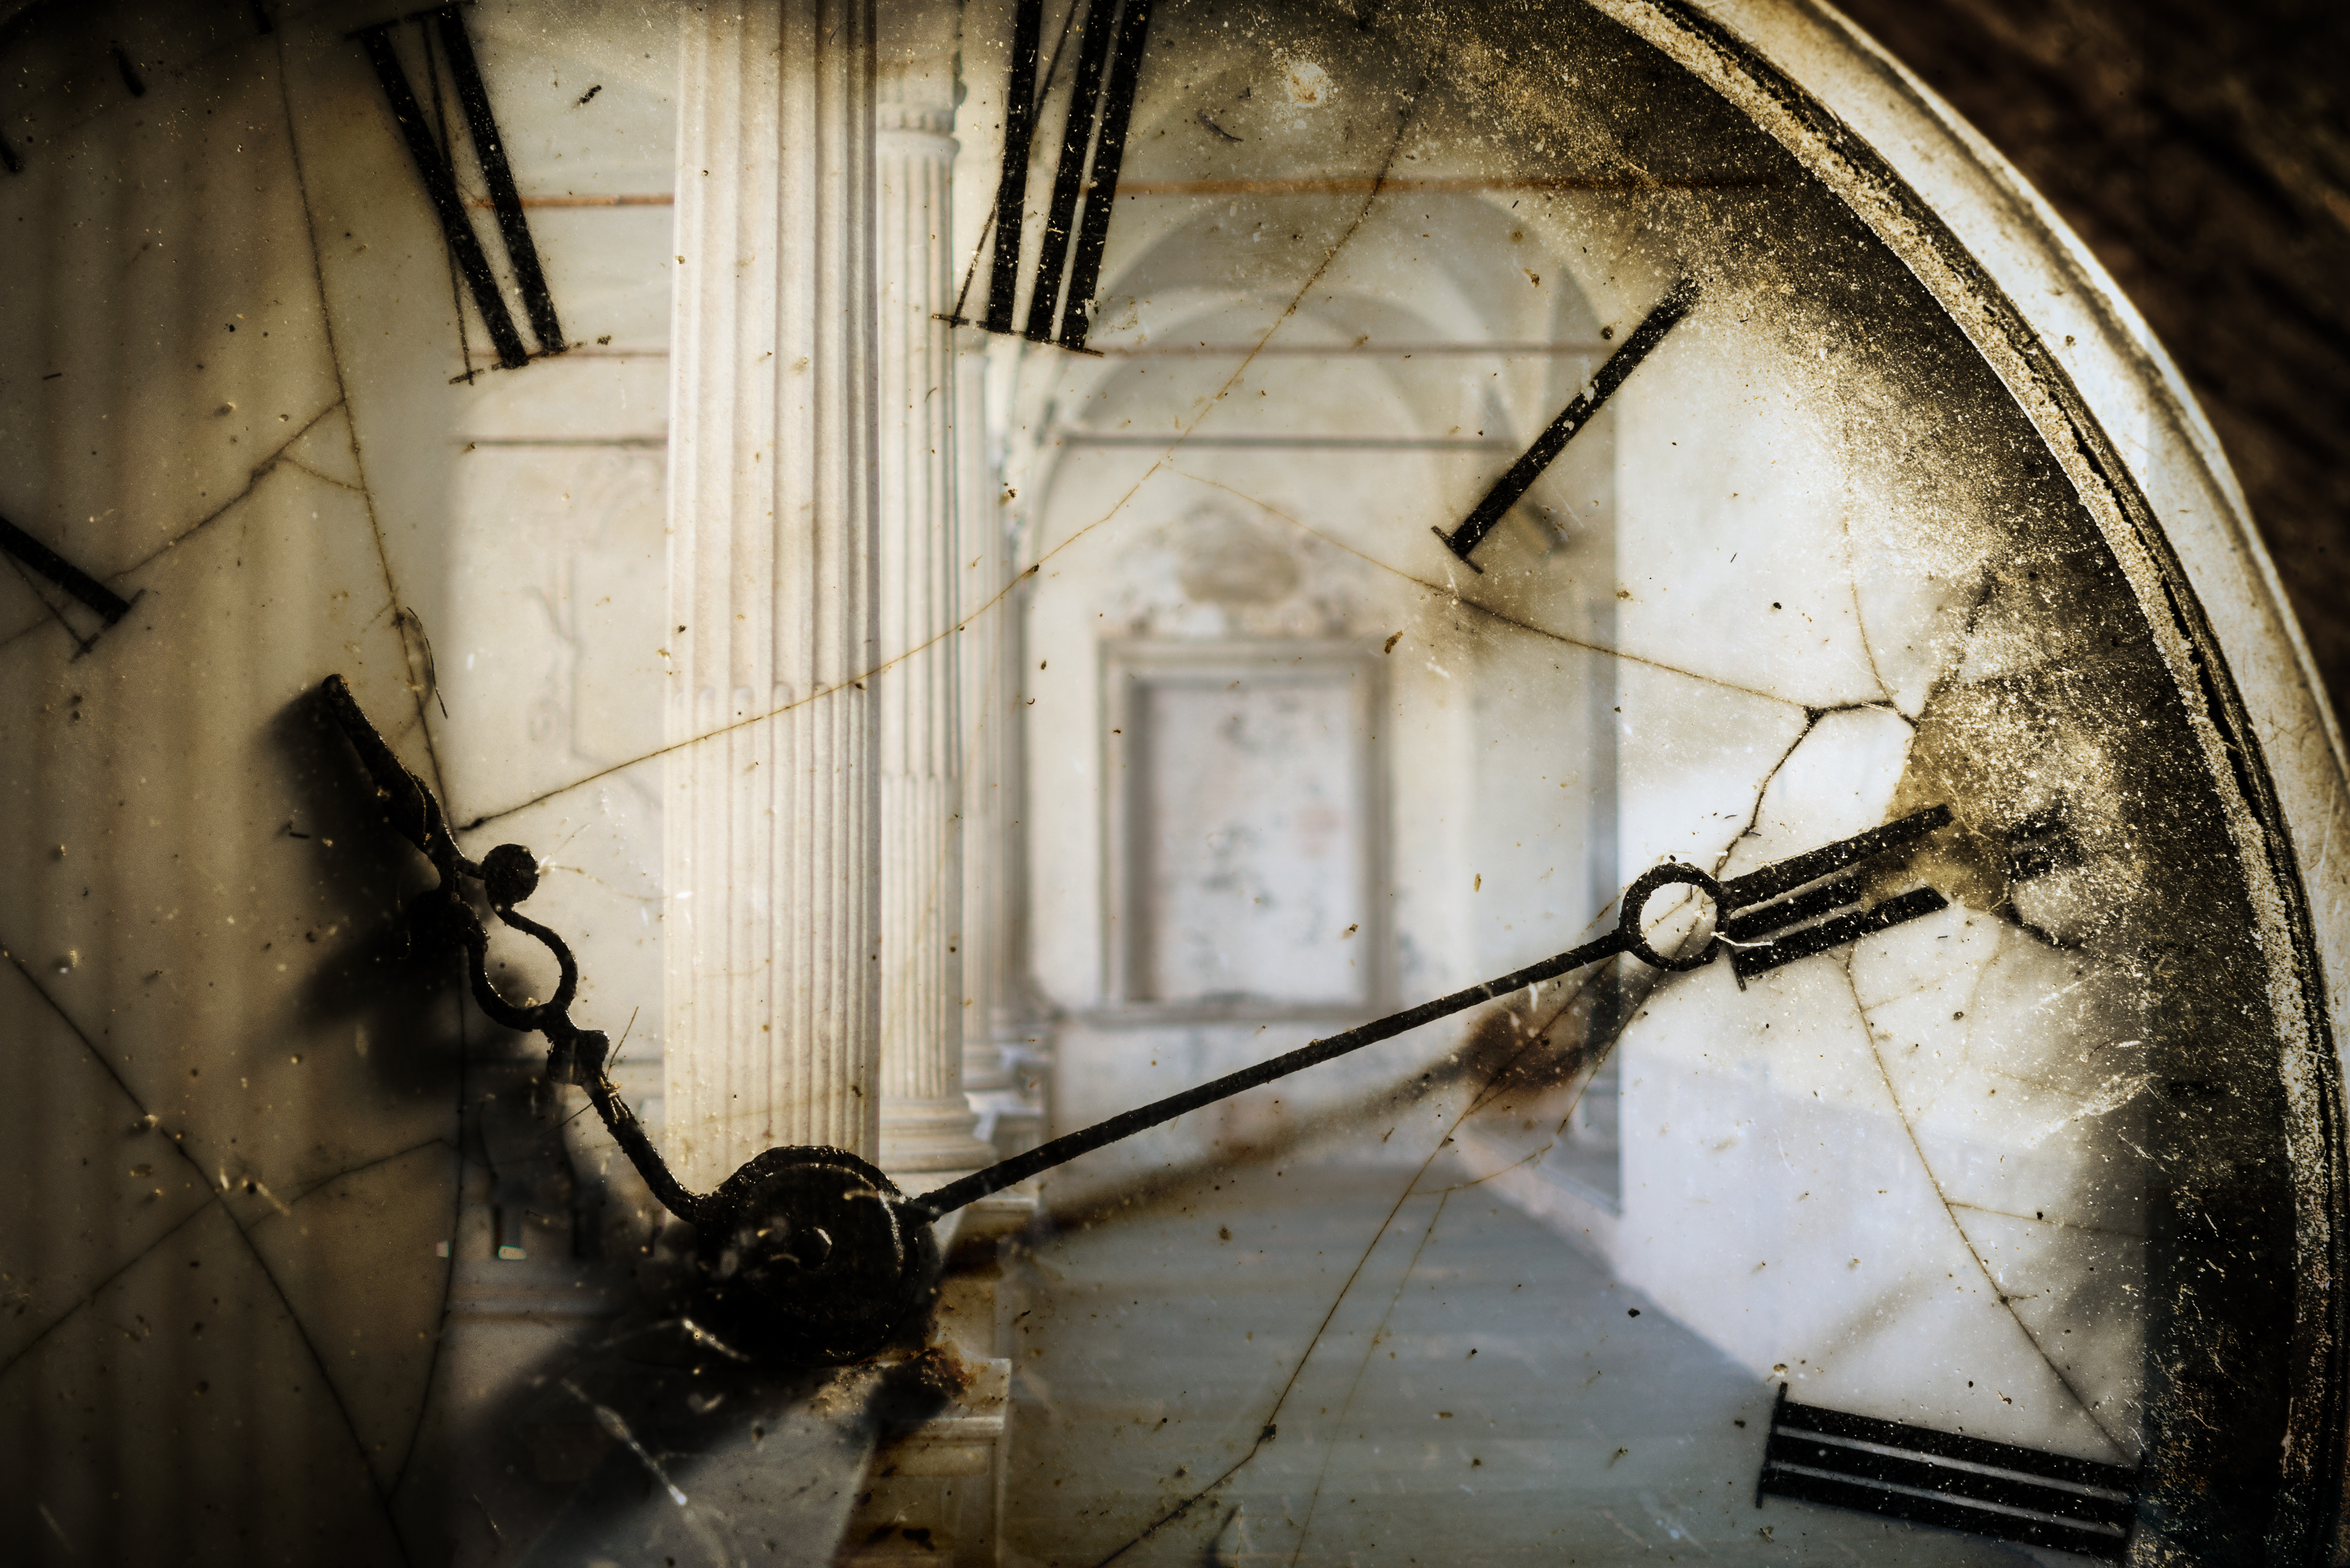 Double exposure of antique pocket watch and old architecture | Source: Getty Images